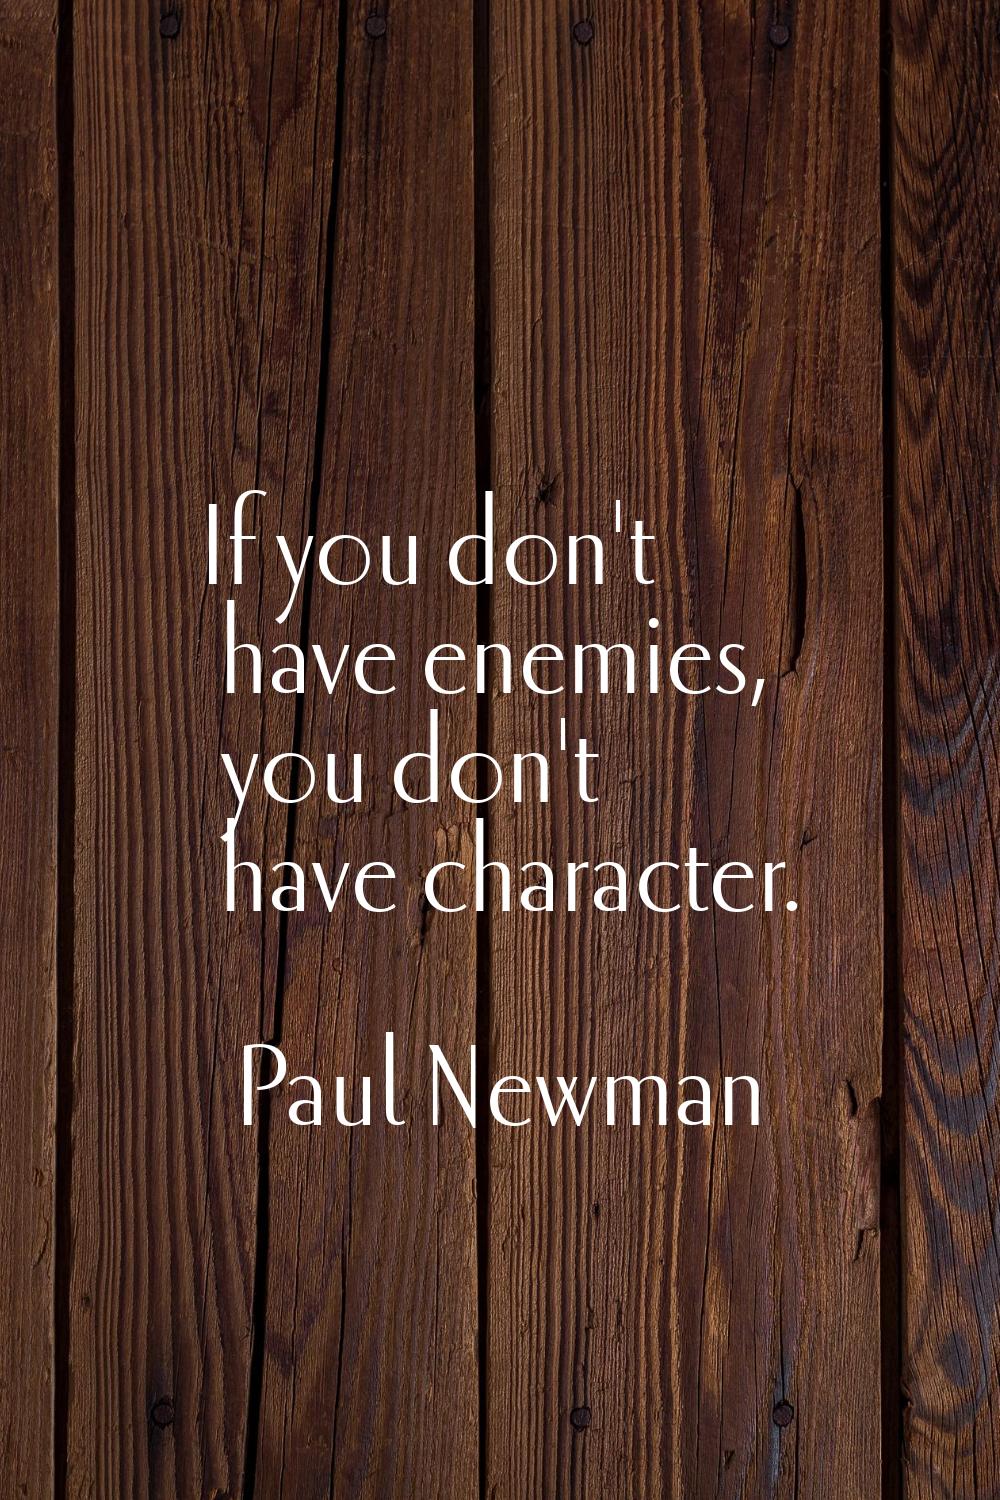 If you don't have enemies, you don't have character.